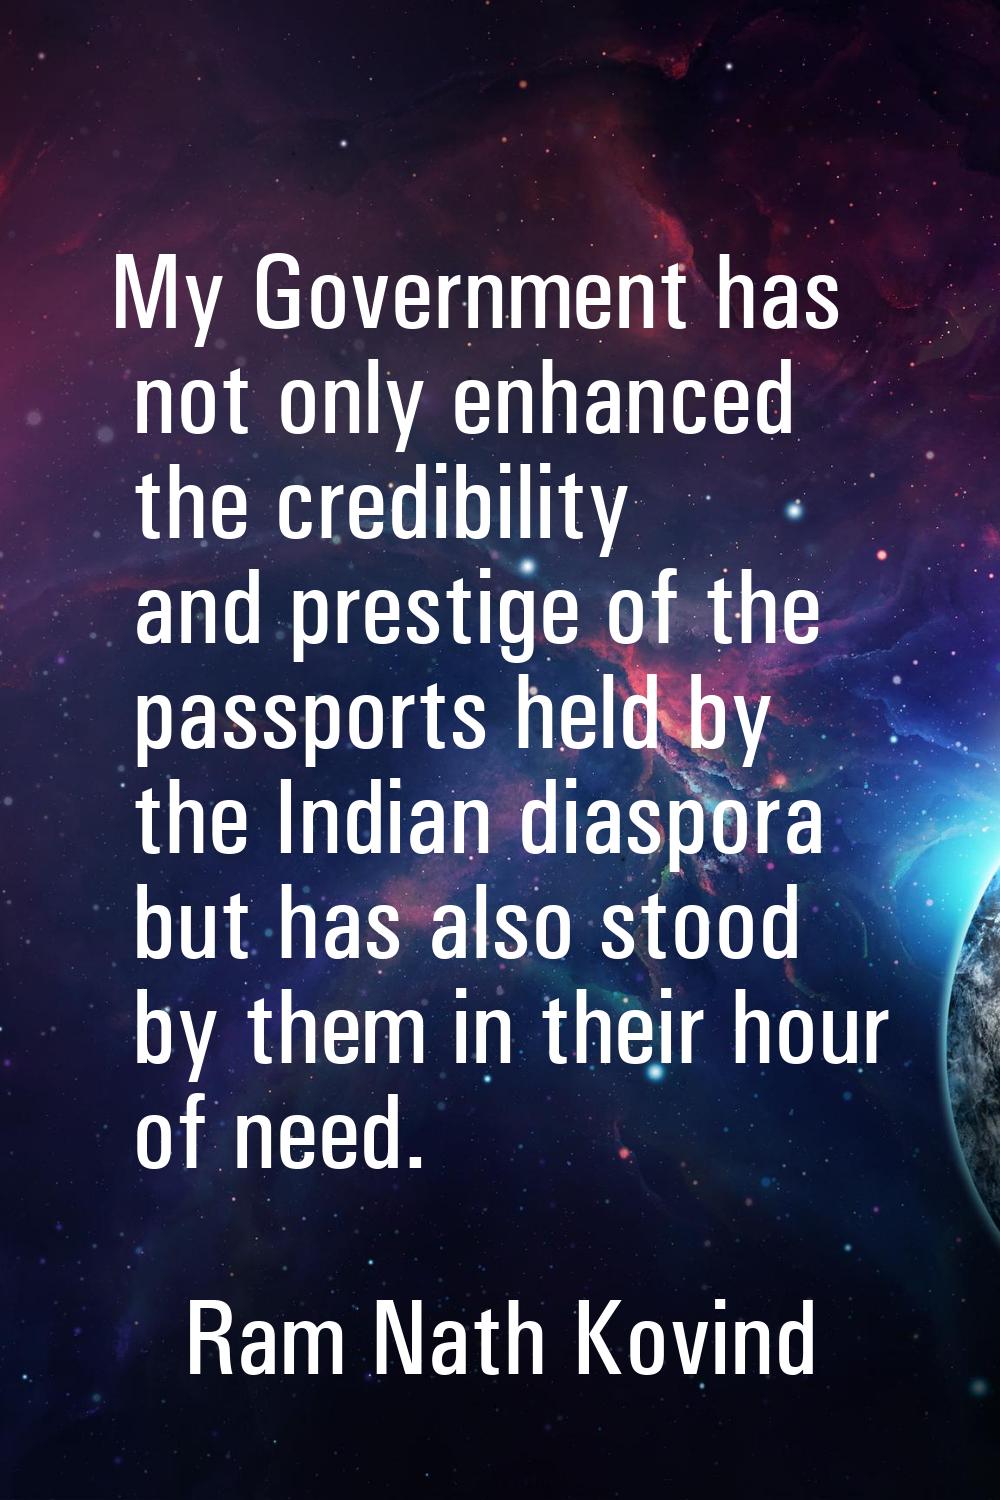 My Government has not only enhanced the credibility and prestige of the passports held by the India